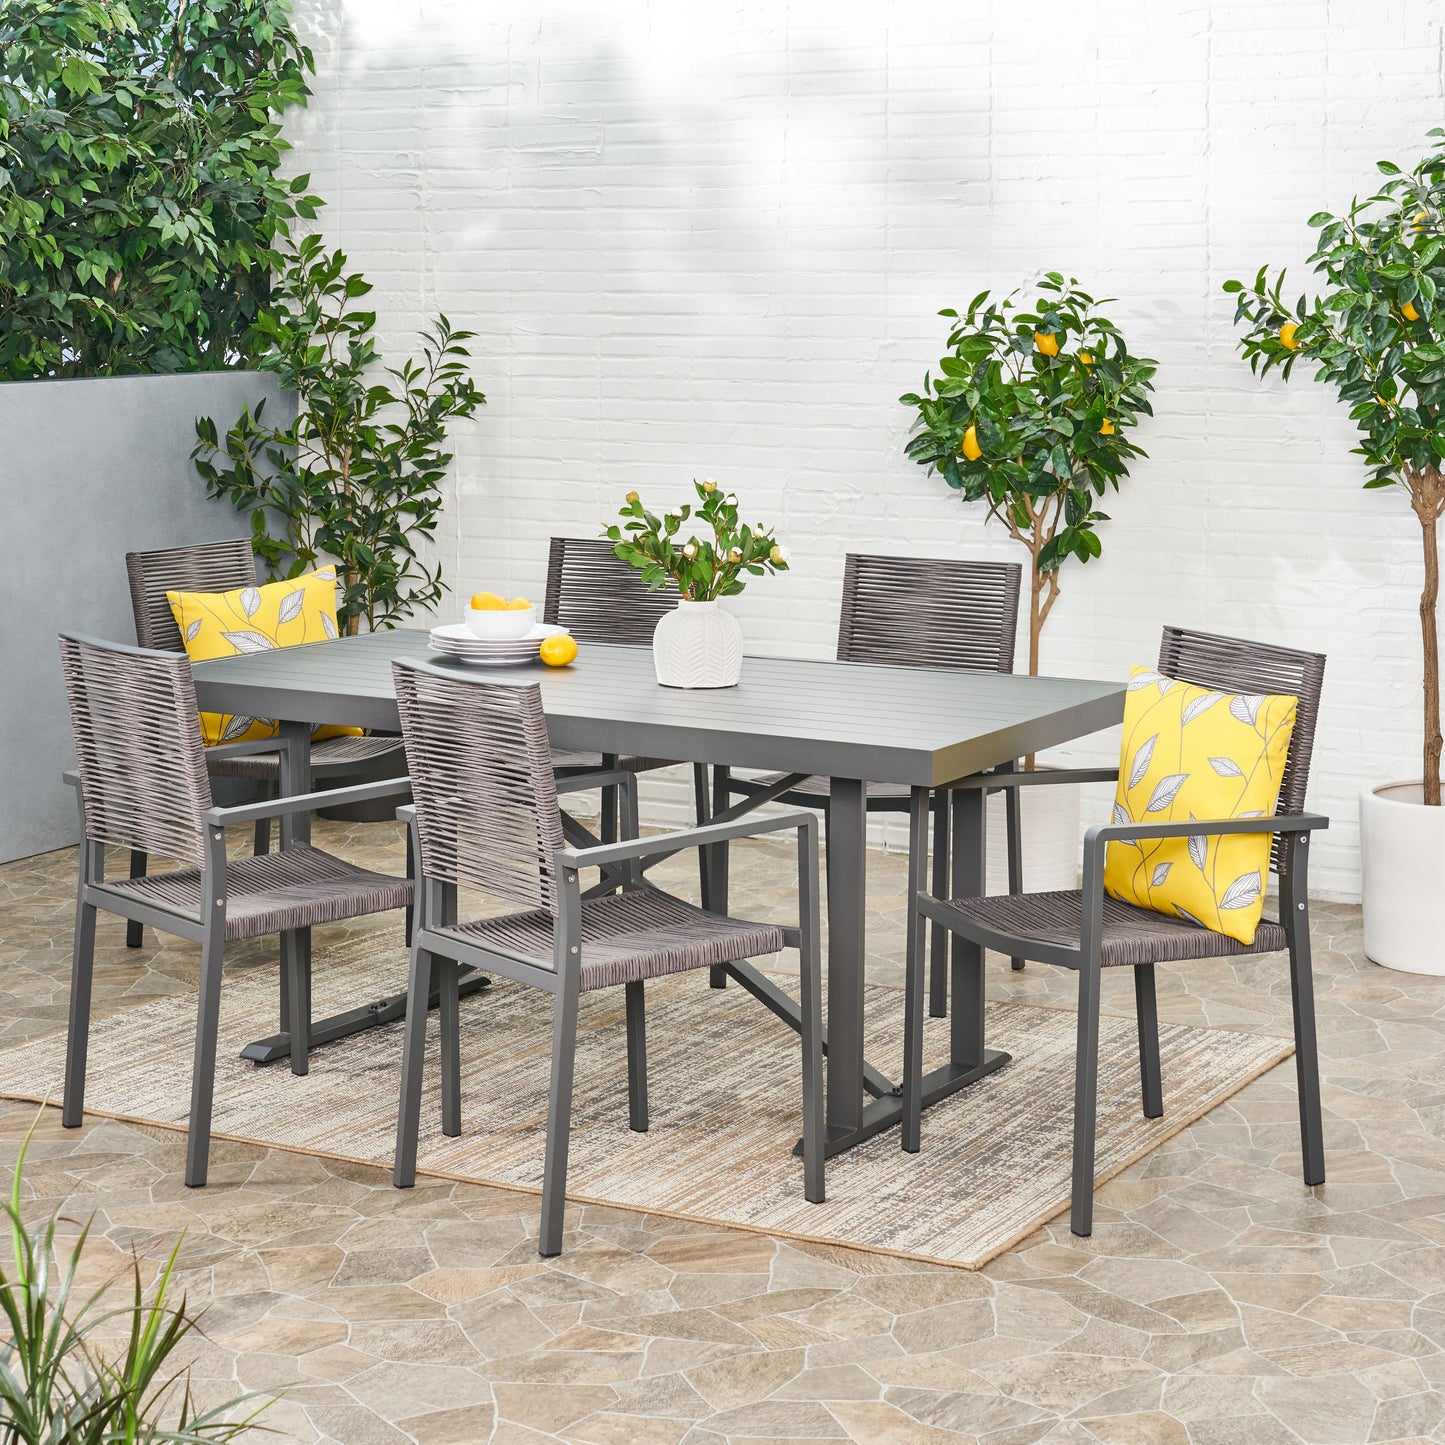 Aponaug Outdoor Modern Industrial Aluminum 7 Piece Dining Set with Rop ...